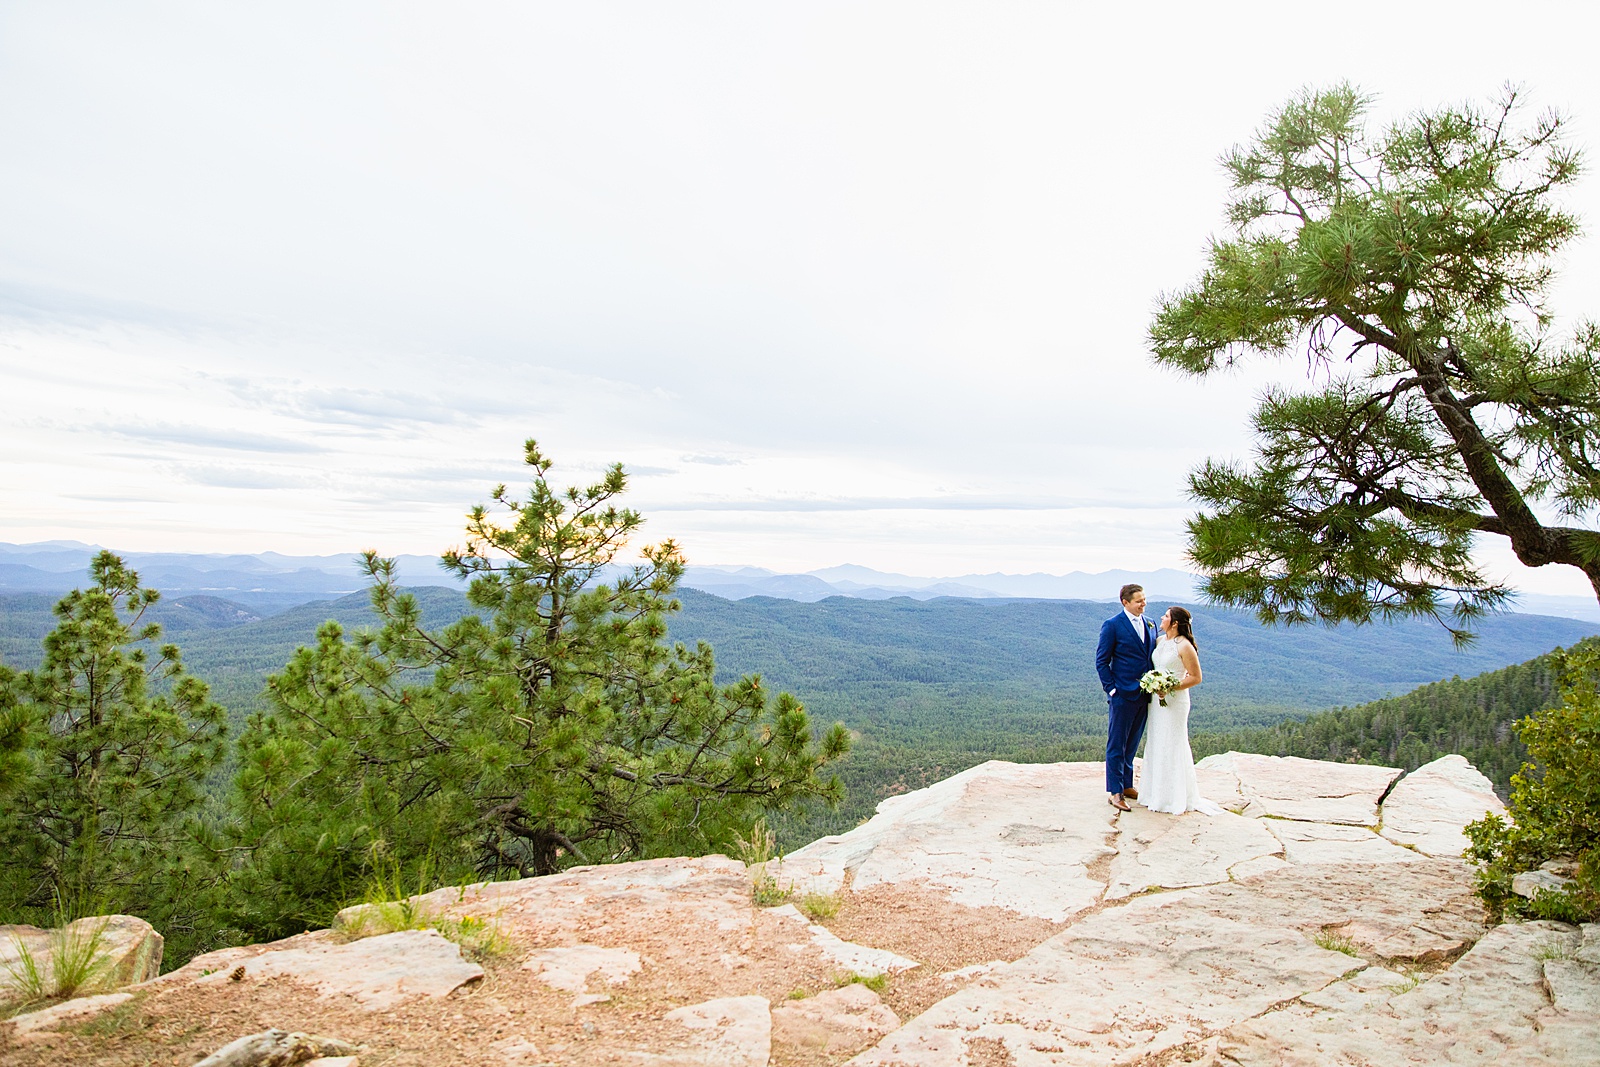 Bride & Groom togethering at their Mogollon Rim wedding ceremony by Payson elopement photographer Juniper and Co Photography.